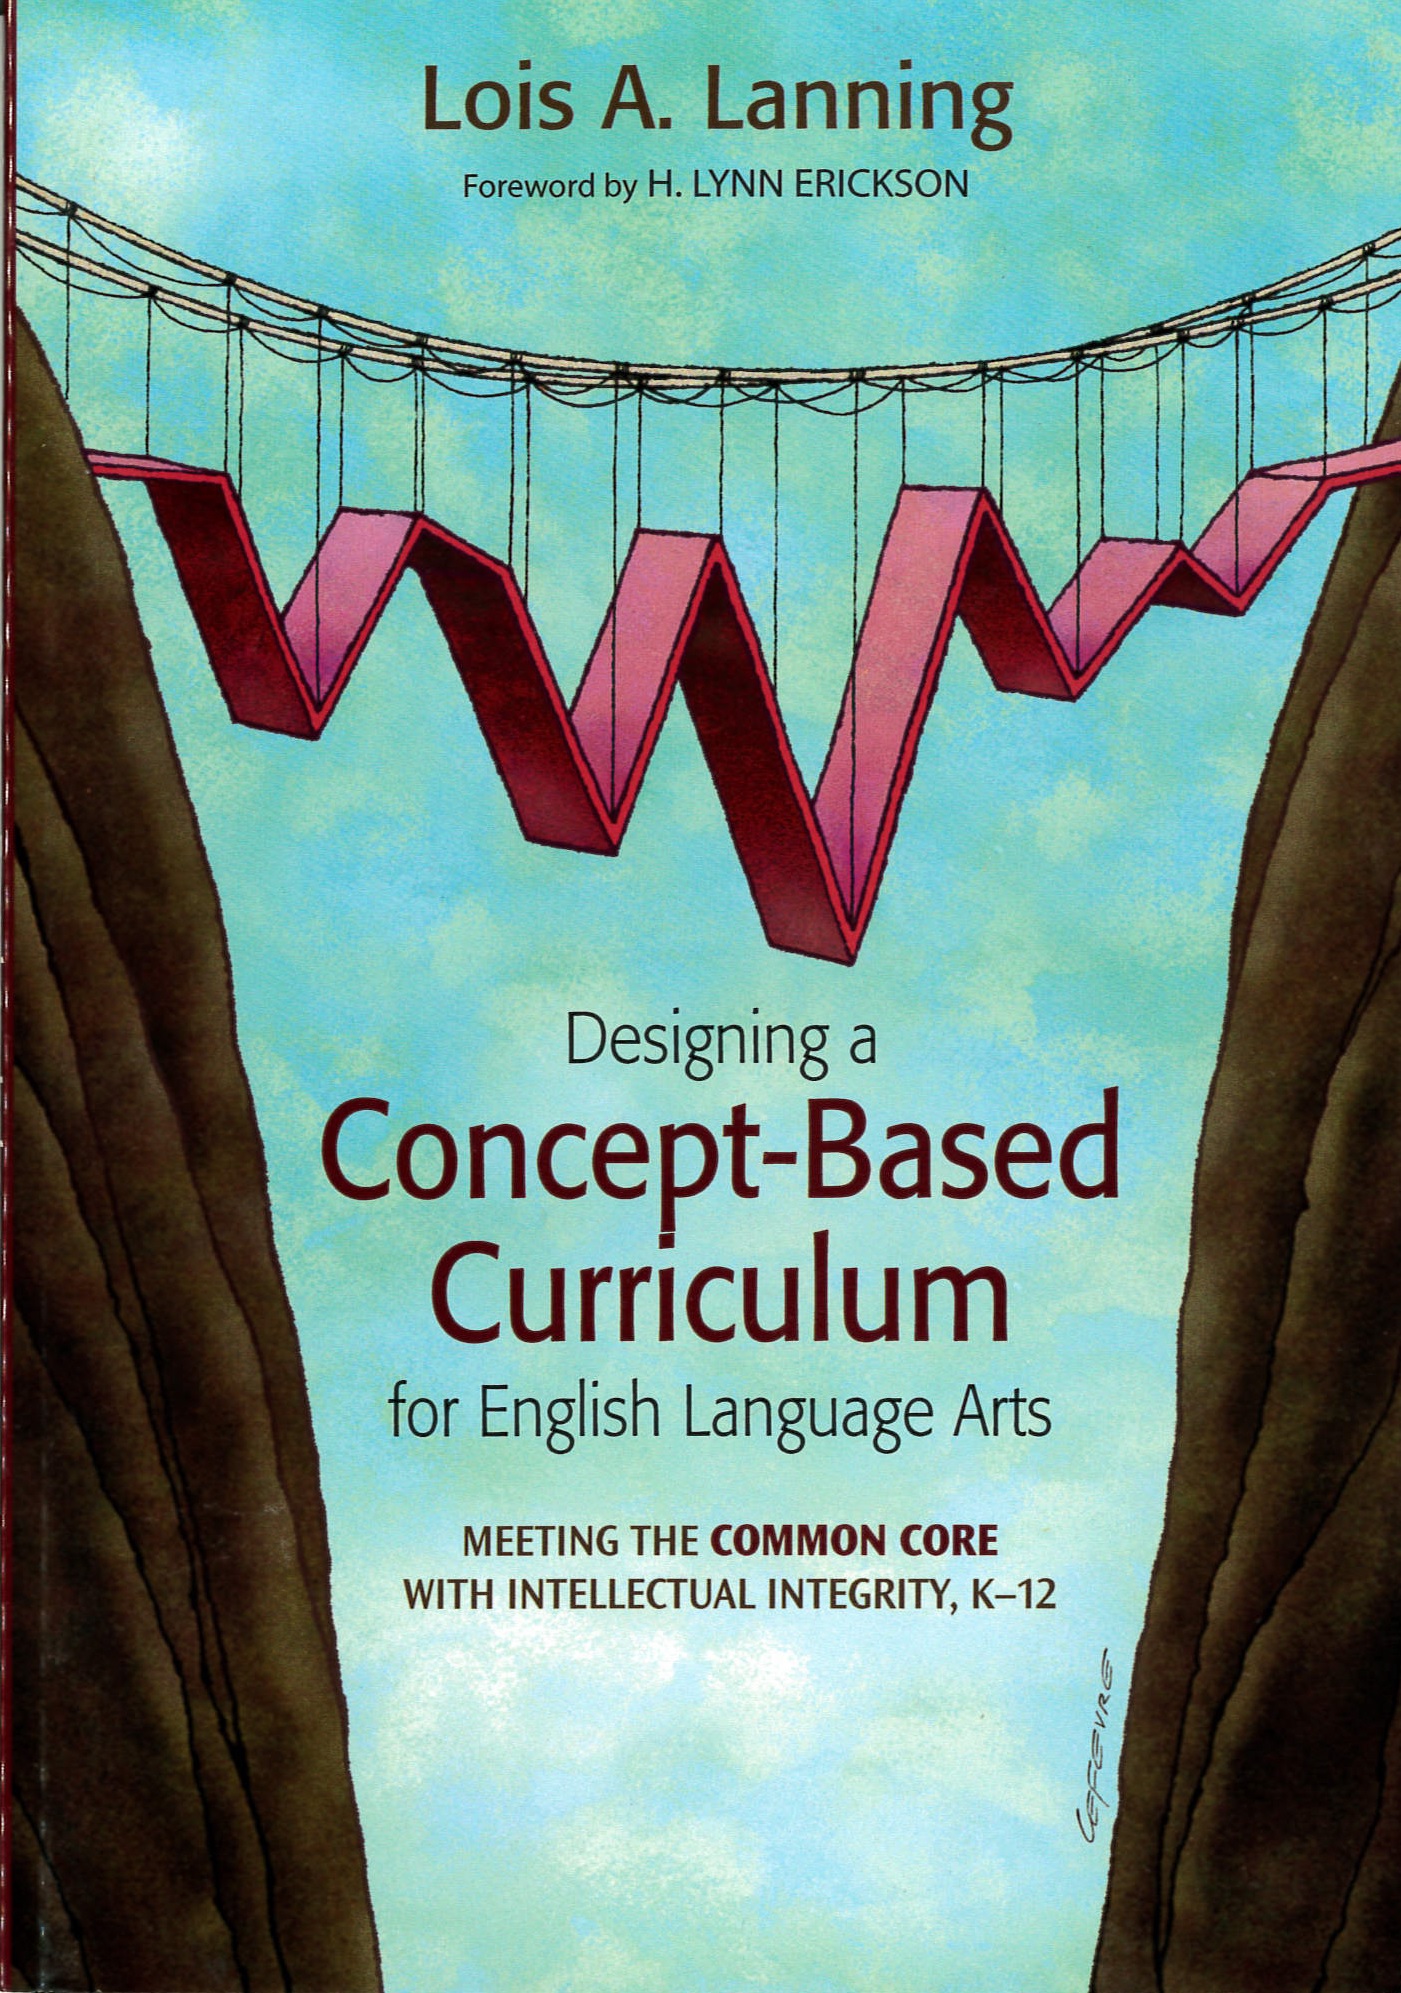 Designing a concept-based curriculum for English language arts : meeting the common core with intellectual integrity, K-12